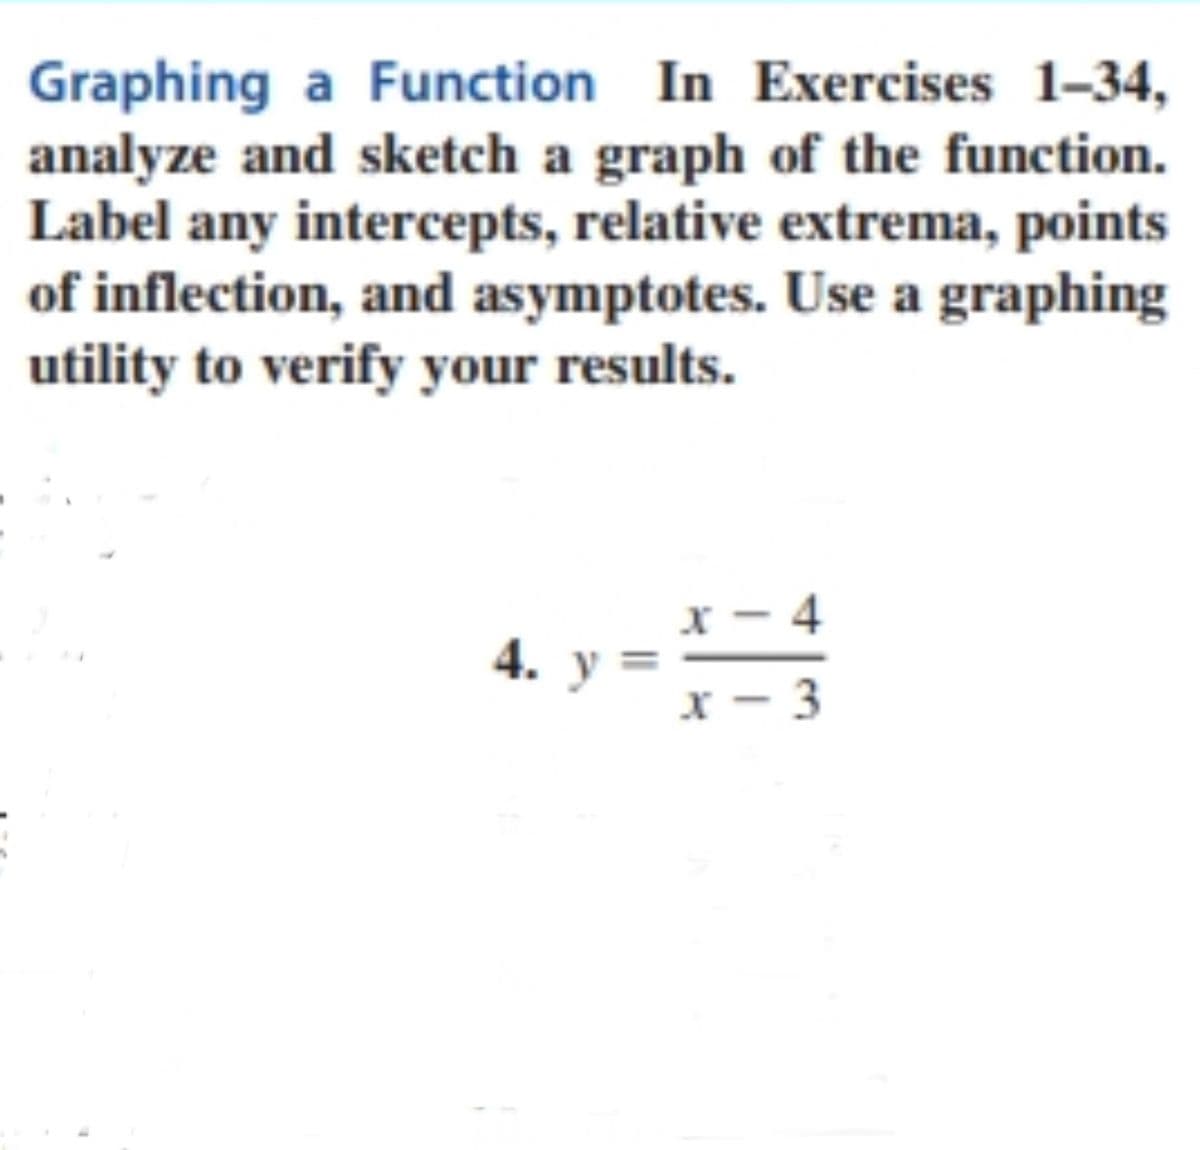 Graphing a Function In Exercises 1-34,
analyze and sketch a graph of the function.
Label any intercepts, relative extrema, points
of inflection, and asymptotes. Use a graphing
utility to verify your results.
x - 4
4. у
x - 3
||
